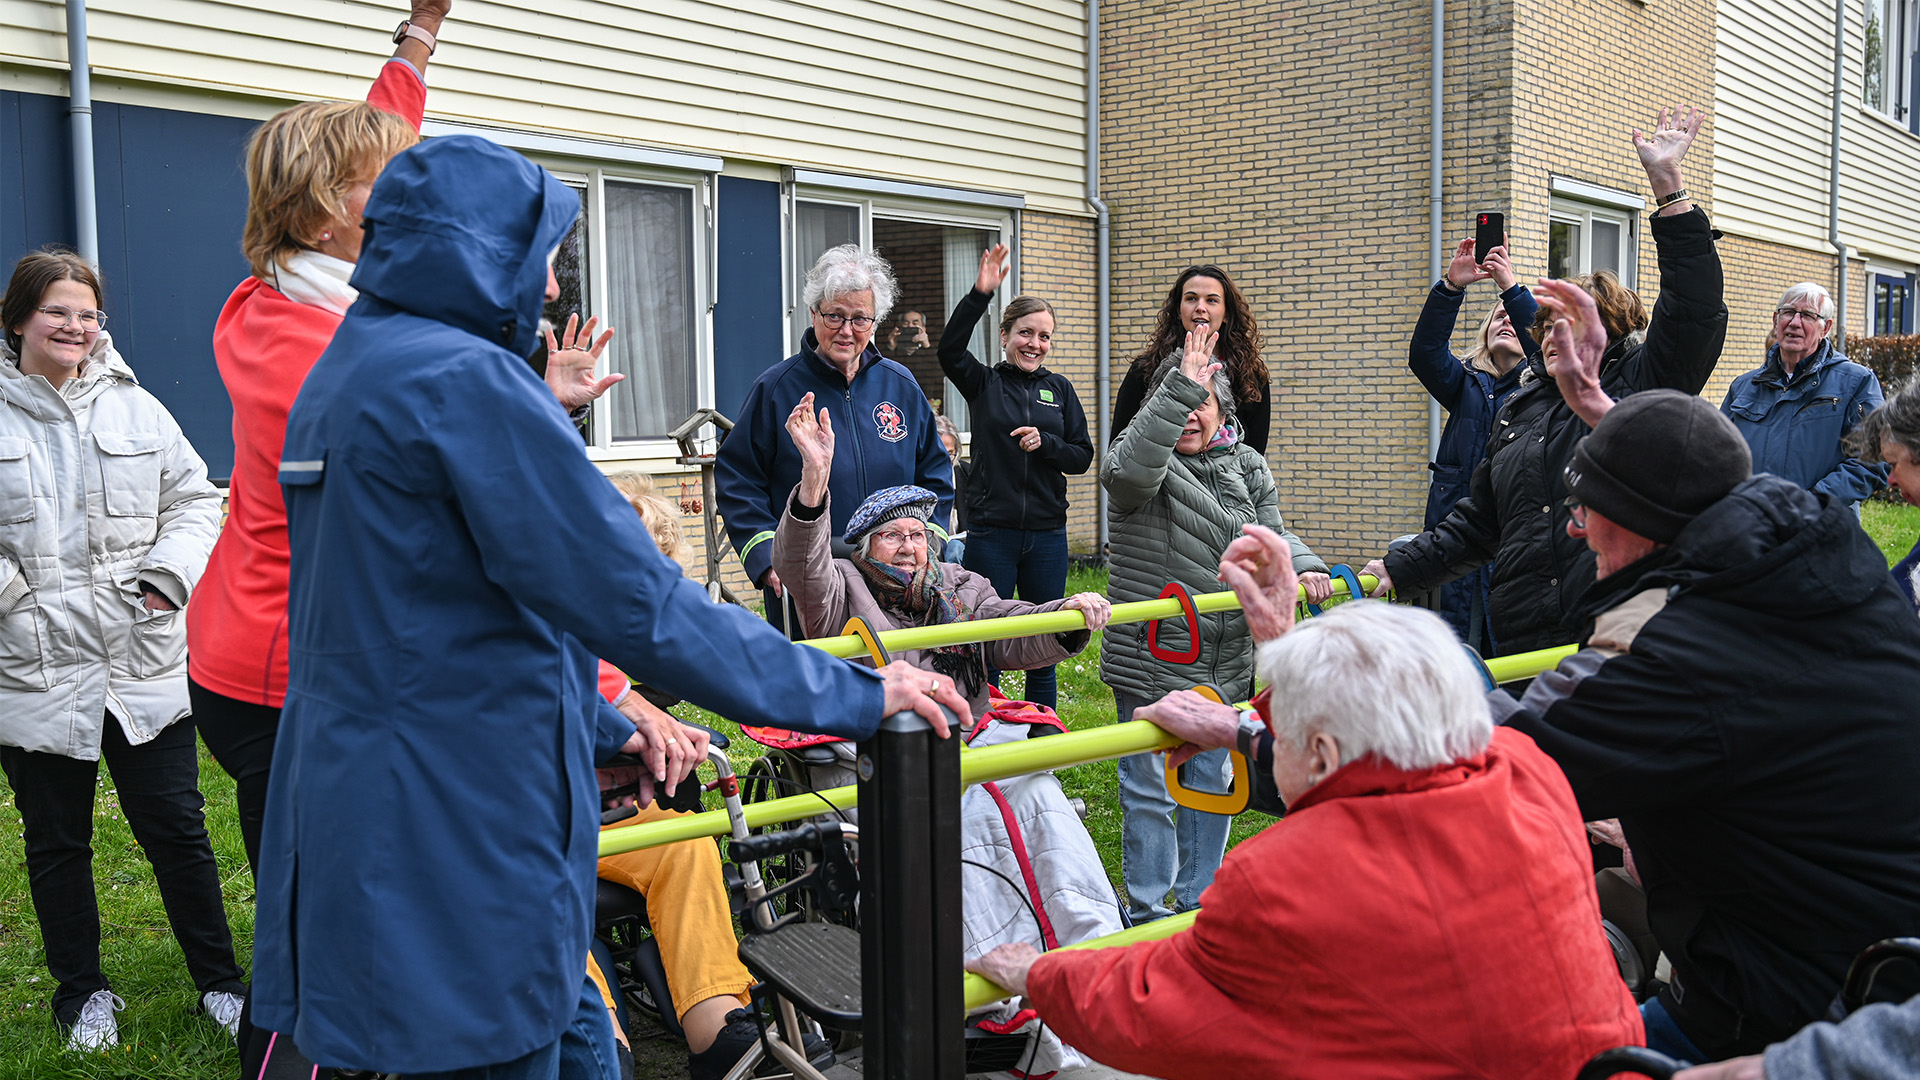 A group of elderly individuals and caregivers gather outdoors, some in wheelchairs, laughing and raising their hands. They are in front of a residential building, with grass underfoot. The mood is cheerful, and people are dressed warmly for cool weather.